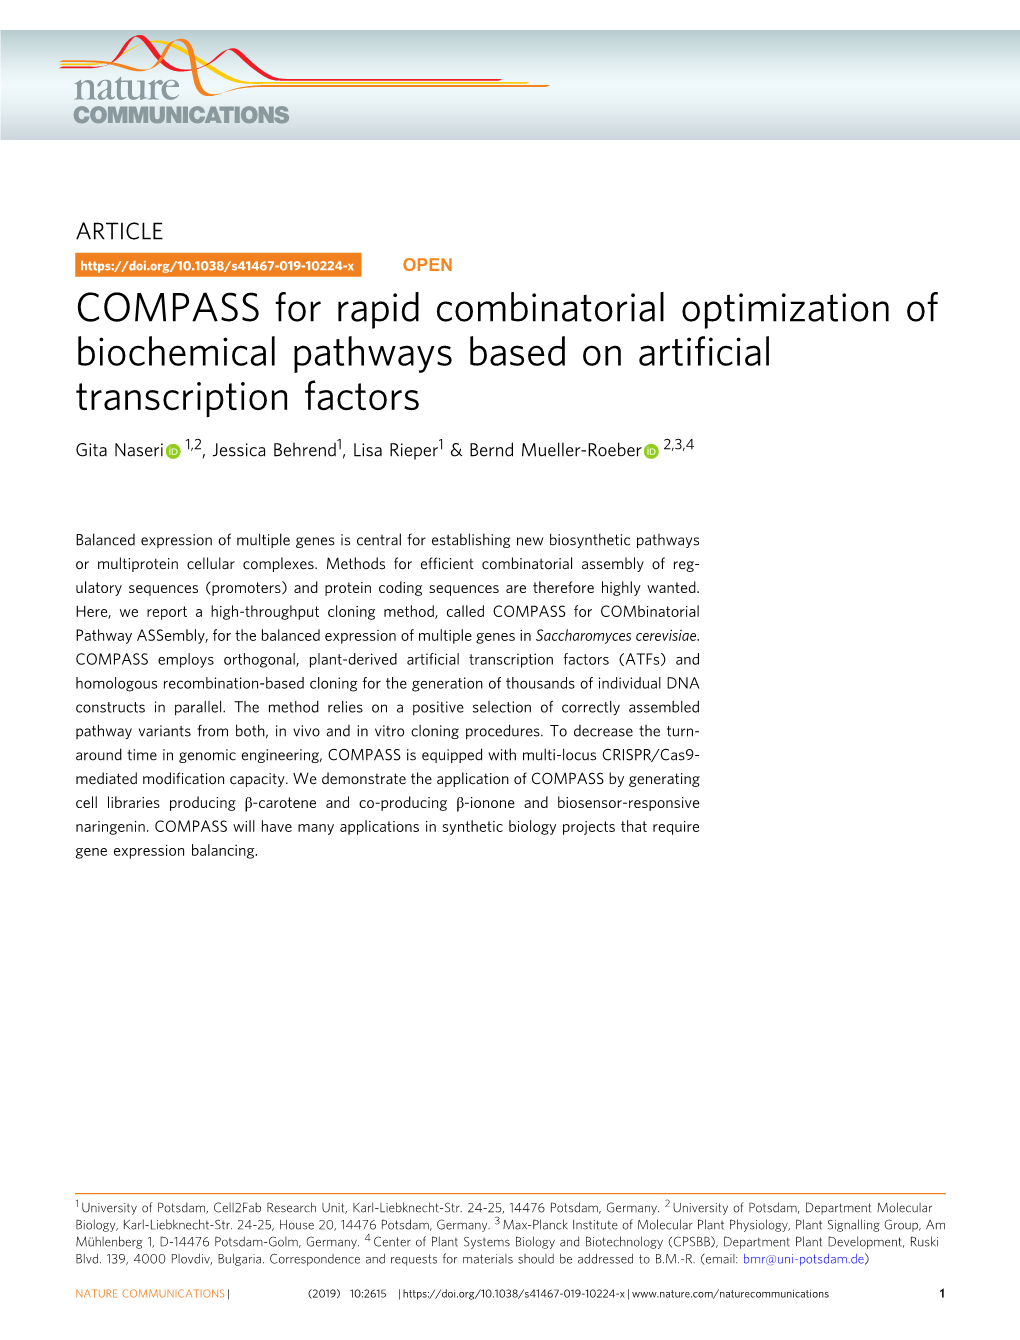 COMPASS for Rapid Combinatorial Optimization of Biochemical Pathways Based on Artificial Transcription Factors